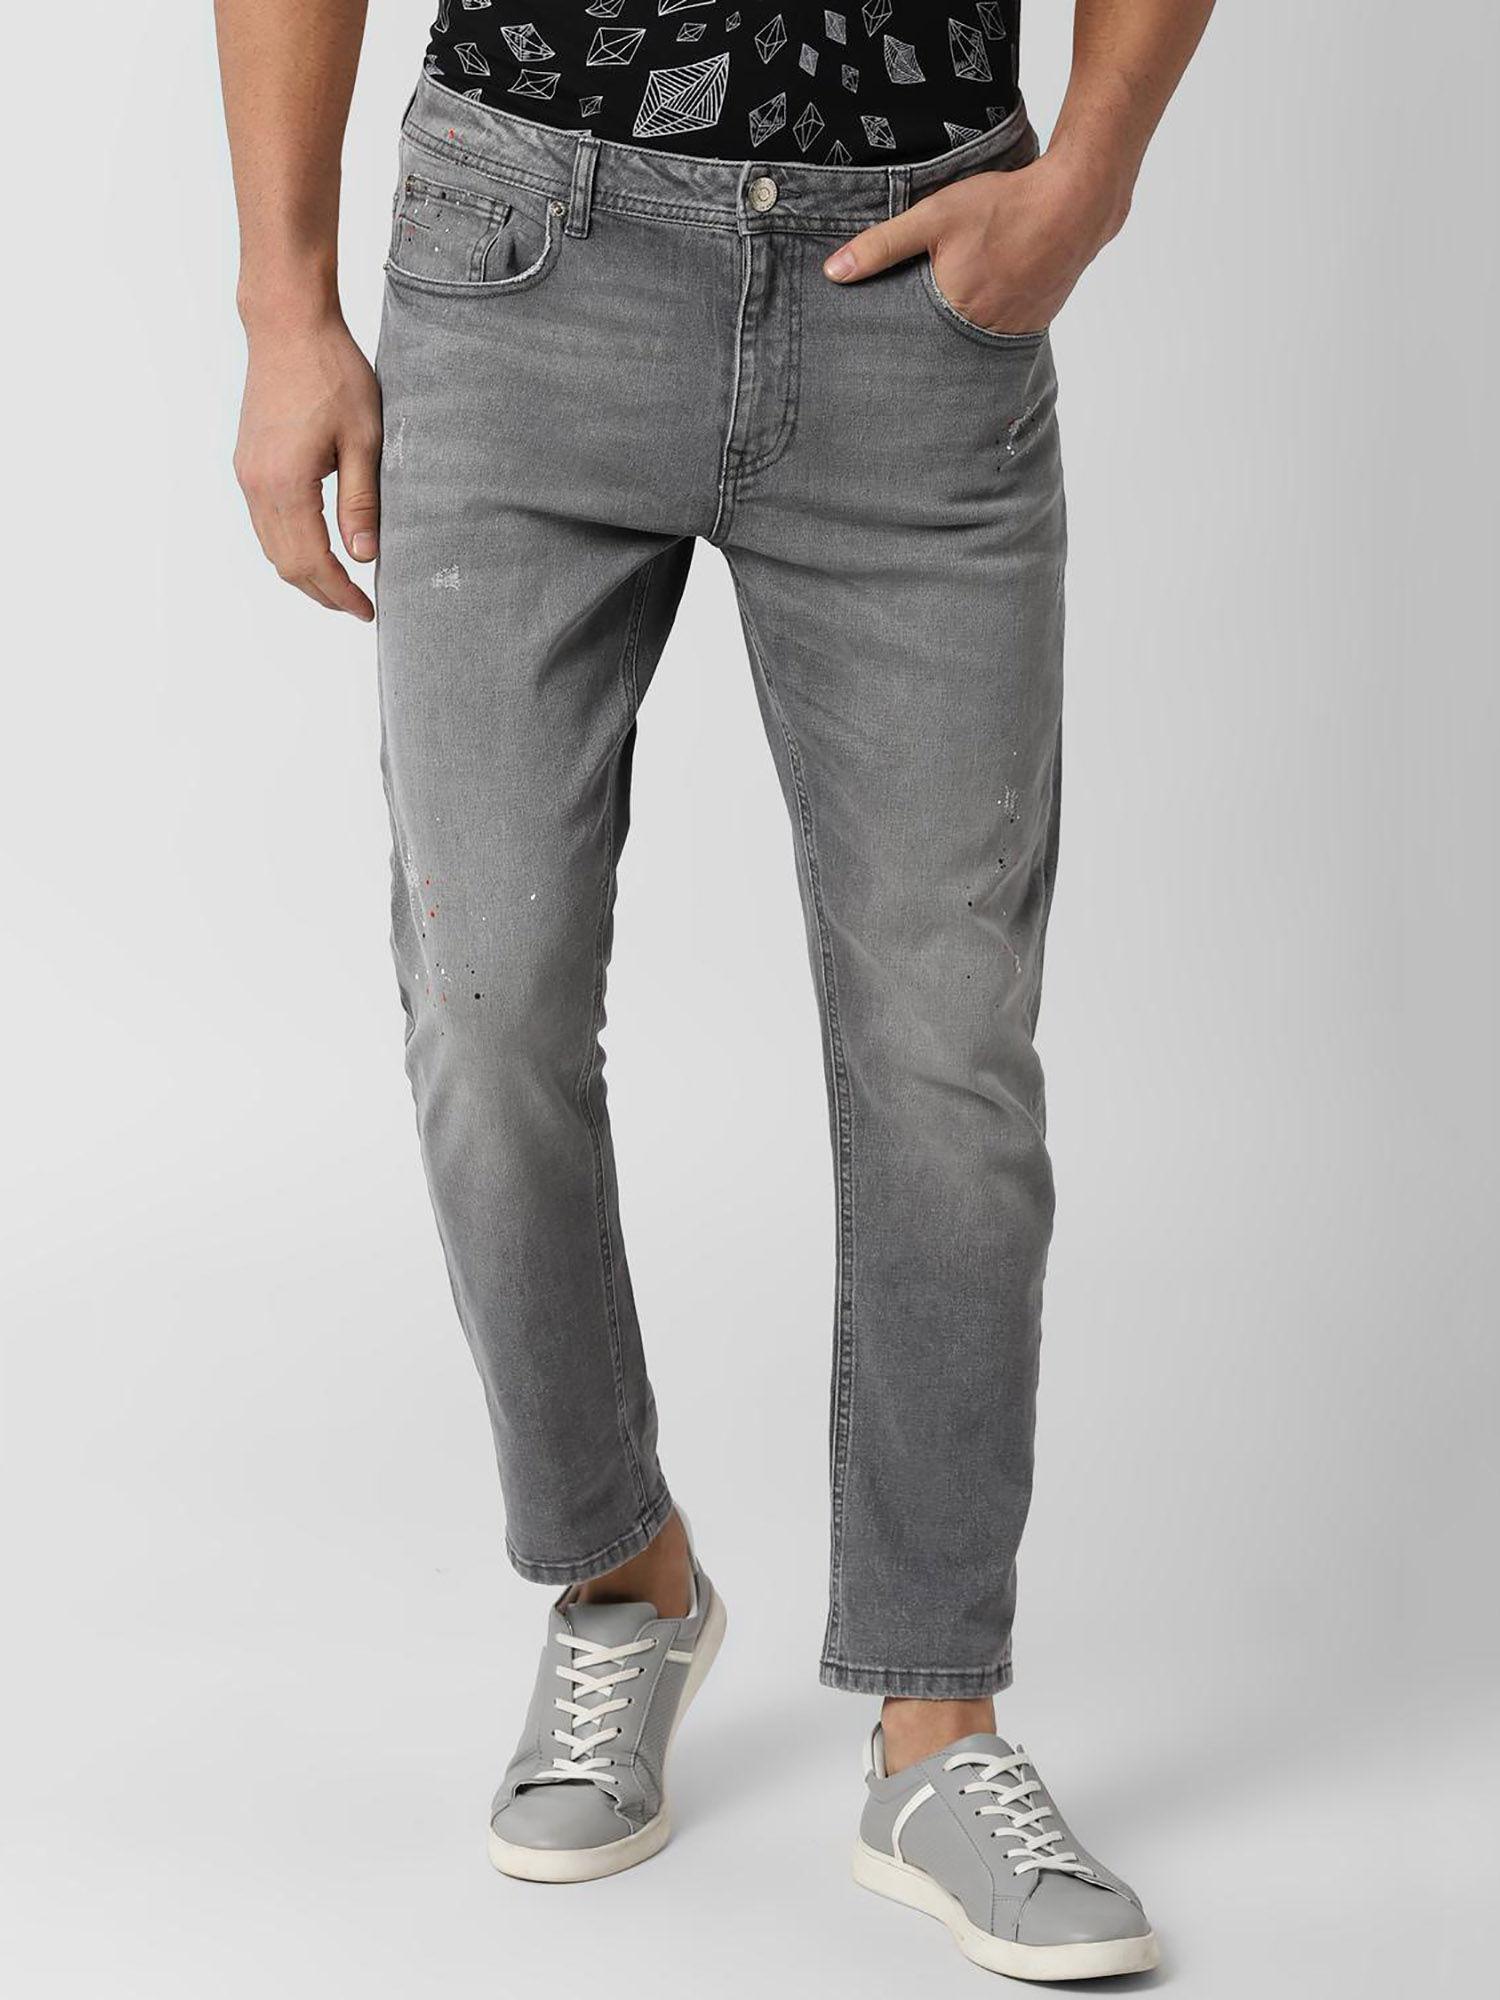 grey solid jeans